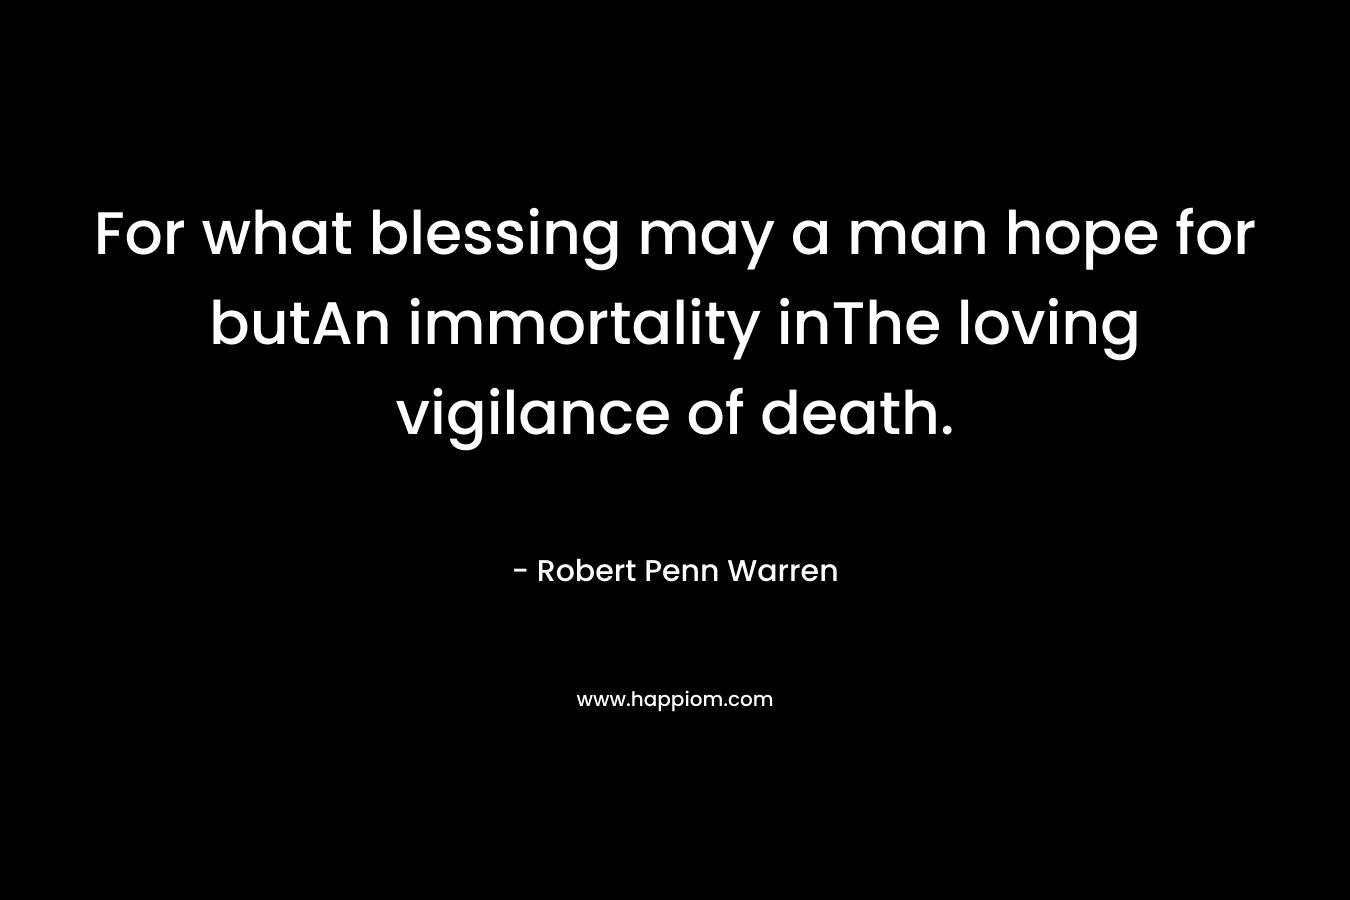 For what blessing may a man hope for butAn immortality inThe loving vigilance of death.